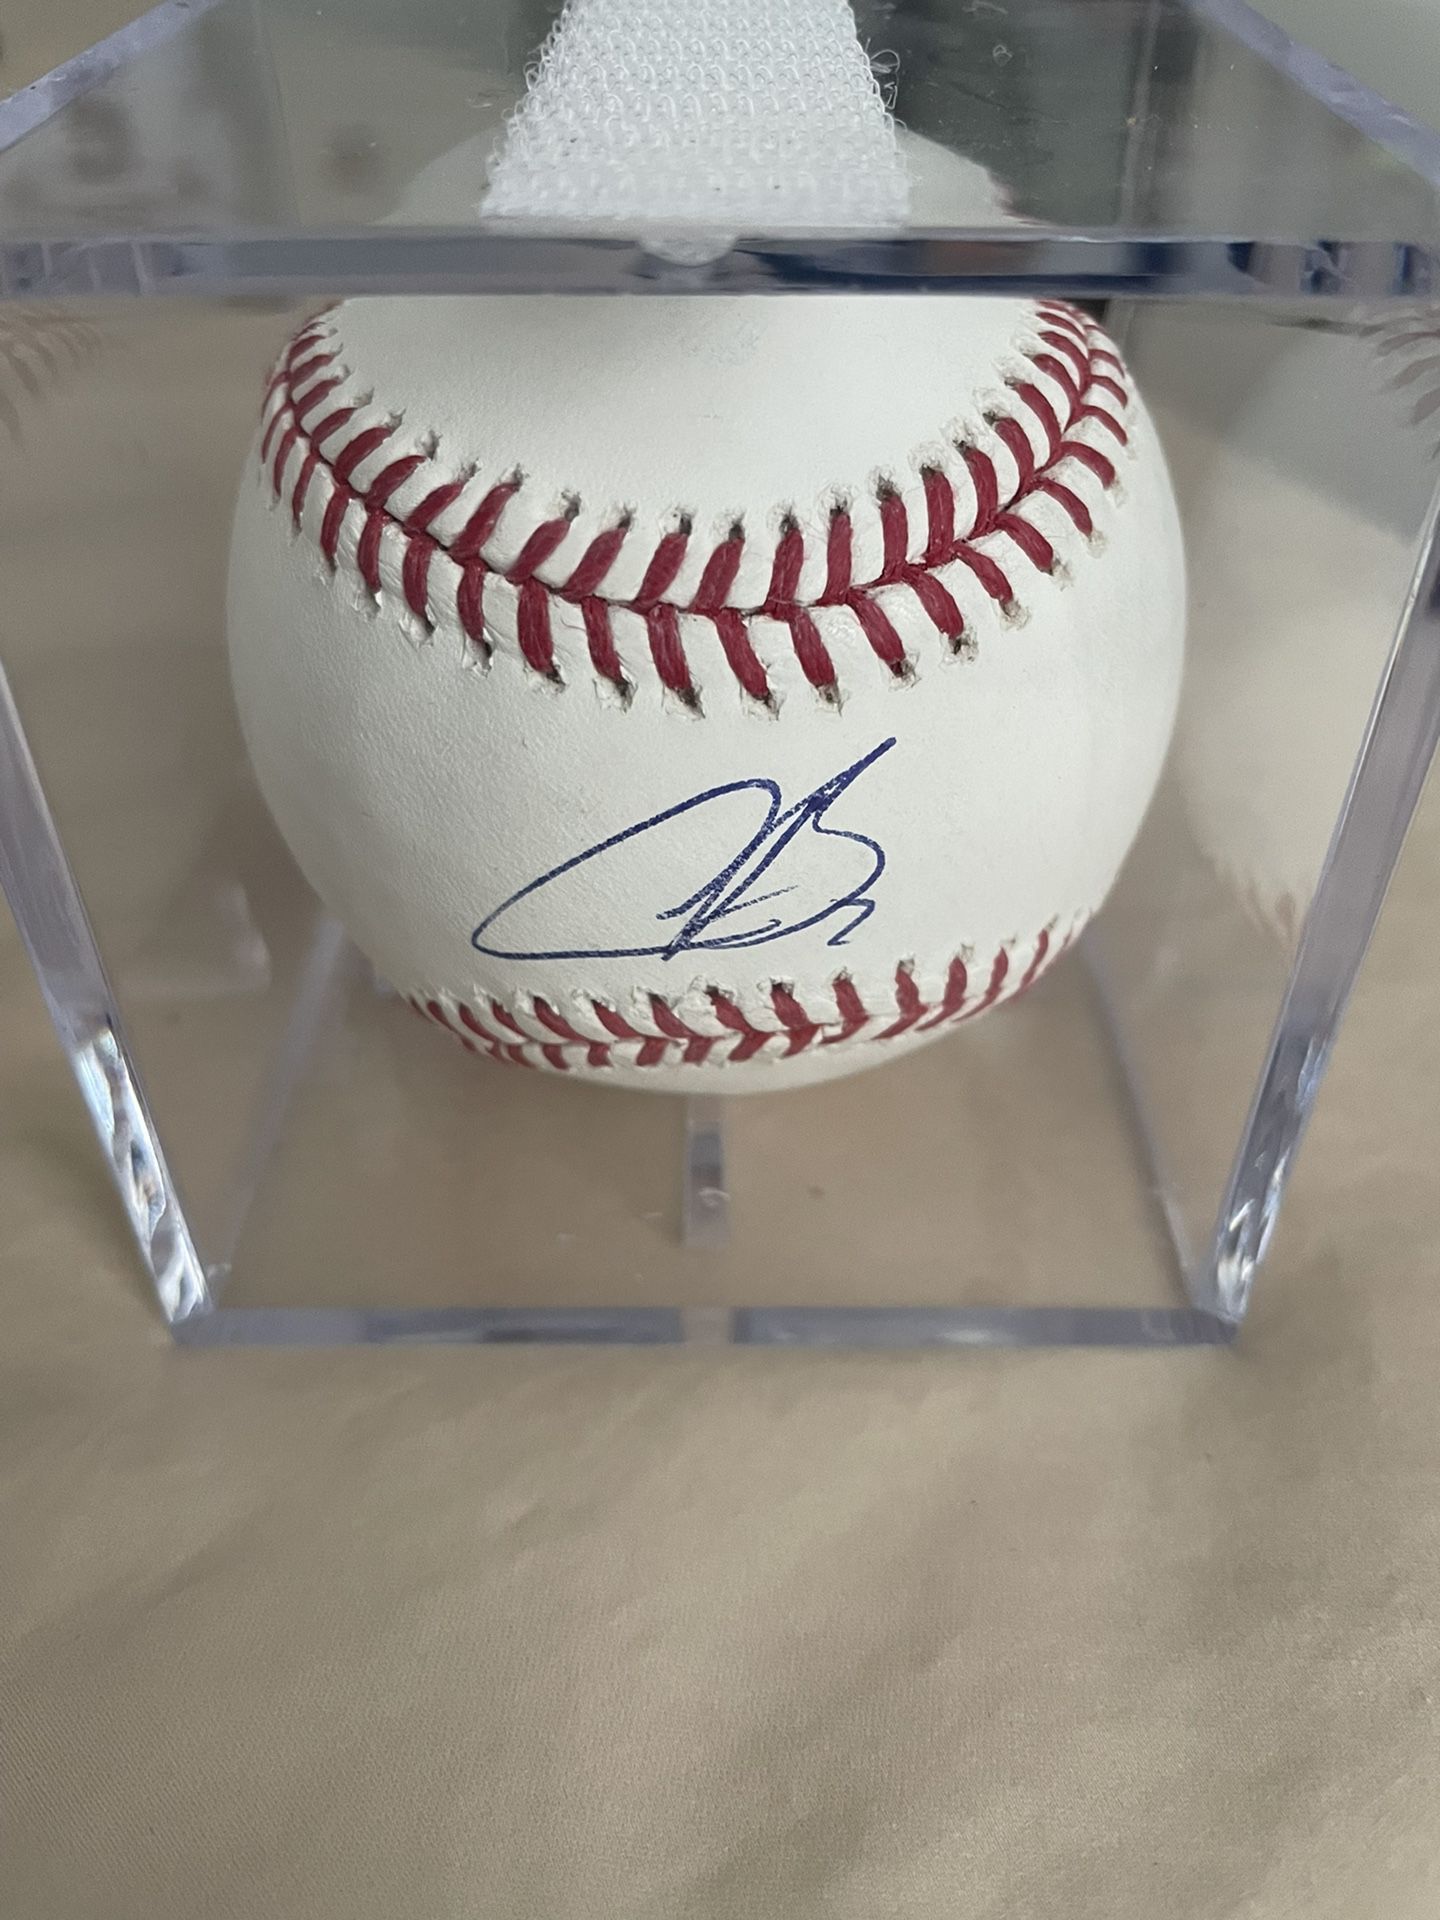 Alex Bregman Signed Baseball for Sale in Fort Myers, FL - OfferUp